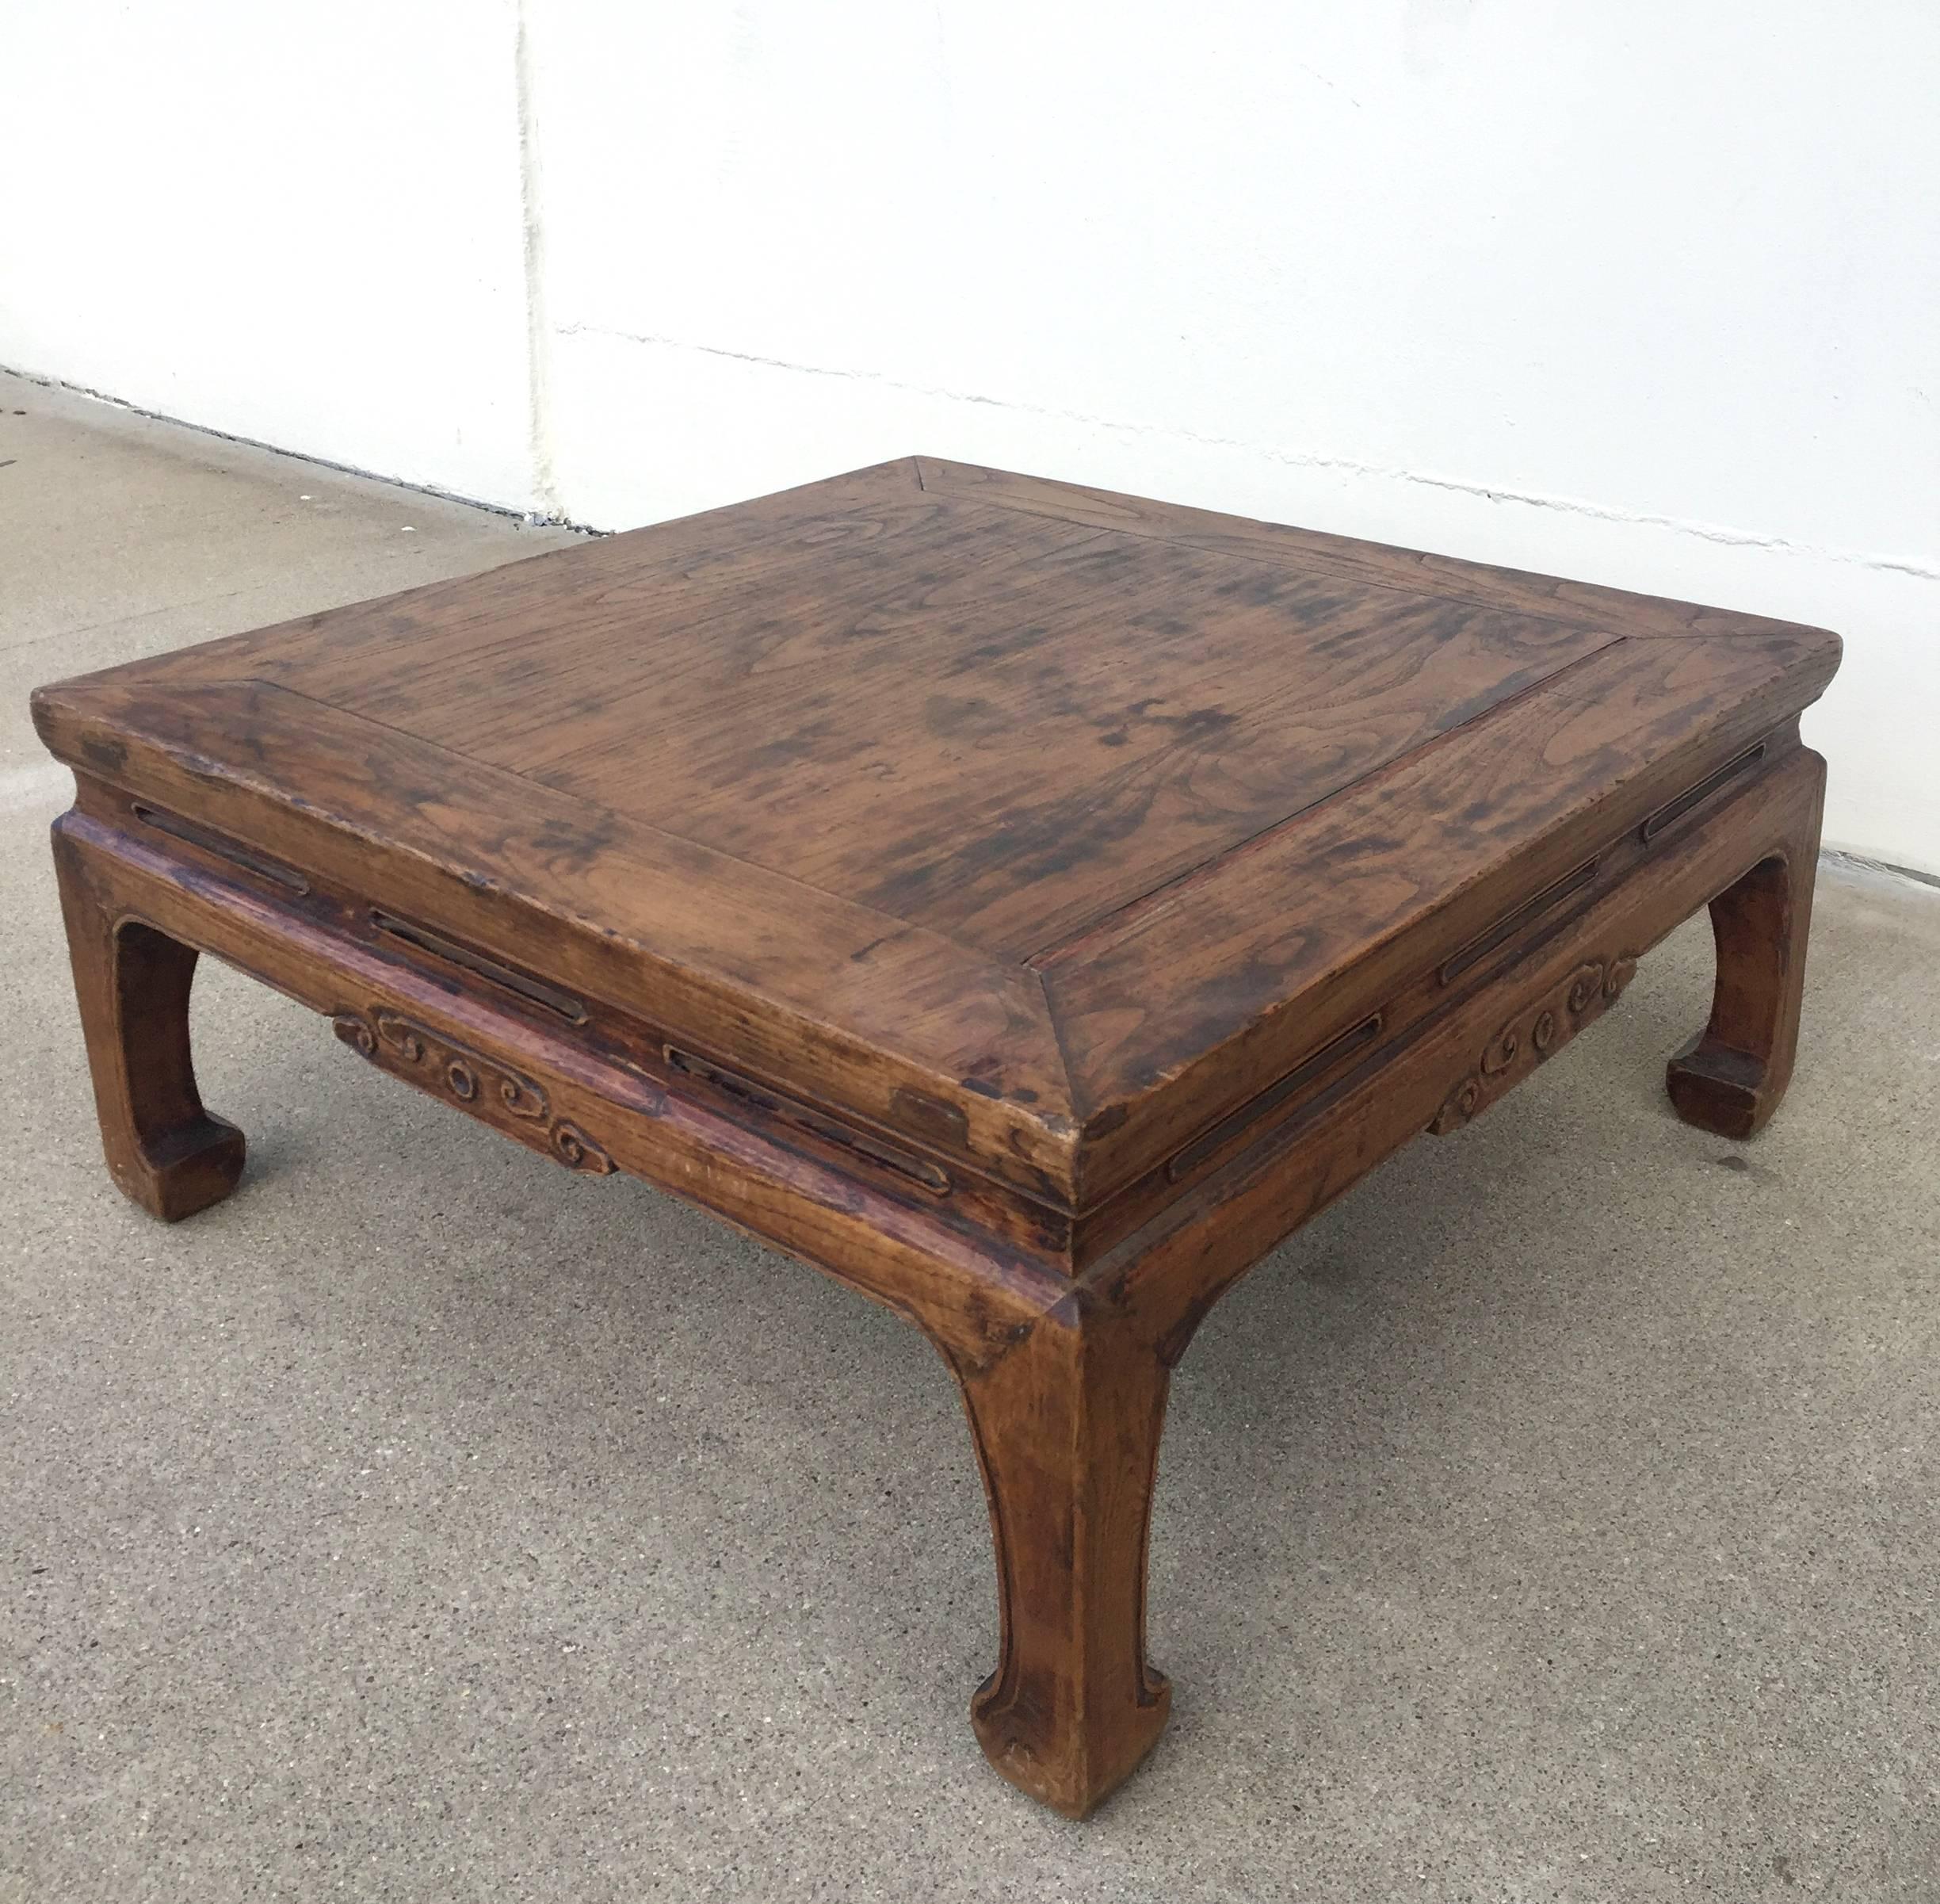 19th Century Antique Chinese Square Kang Table, Low Table For Sale